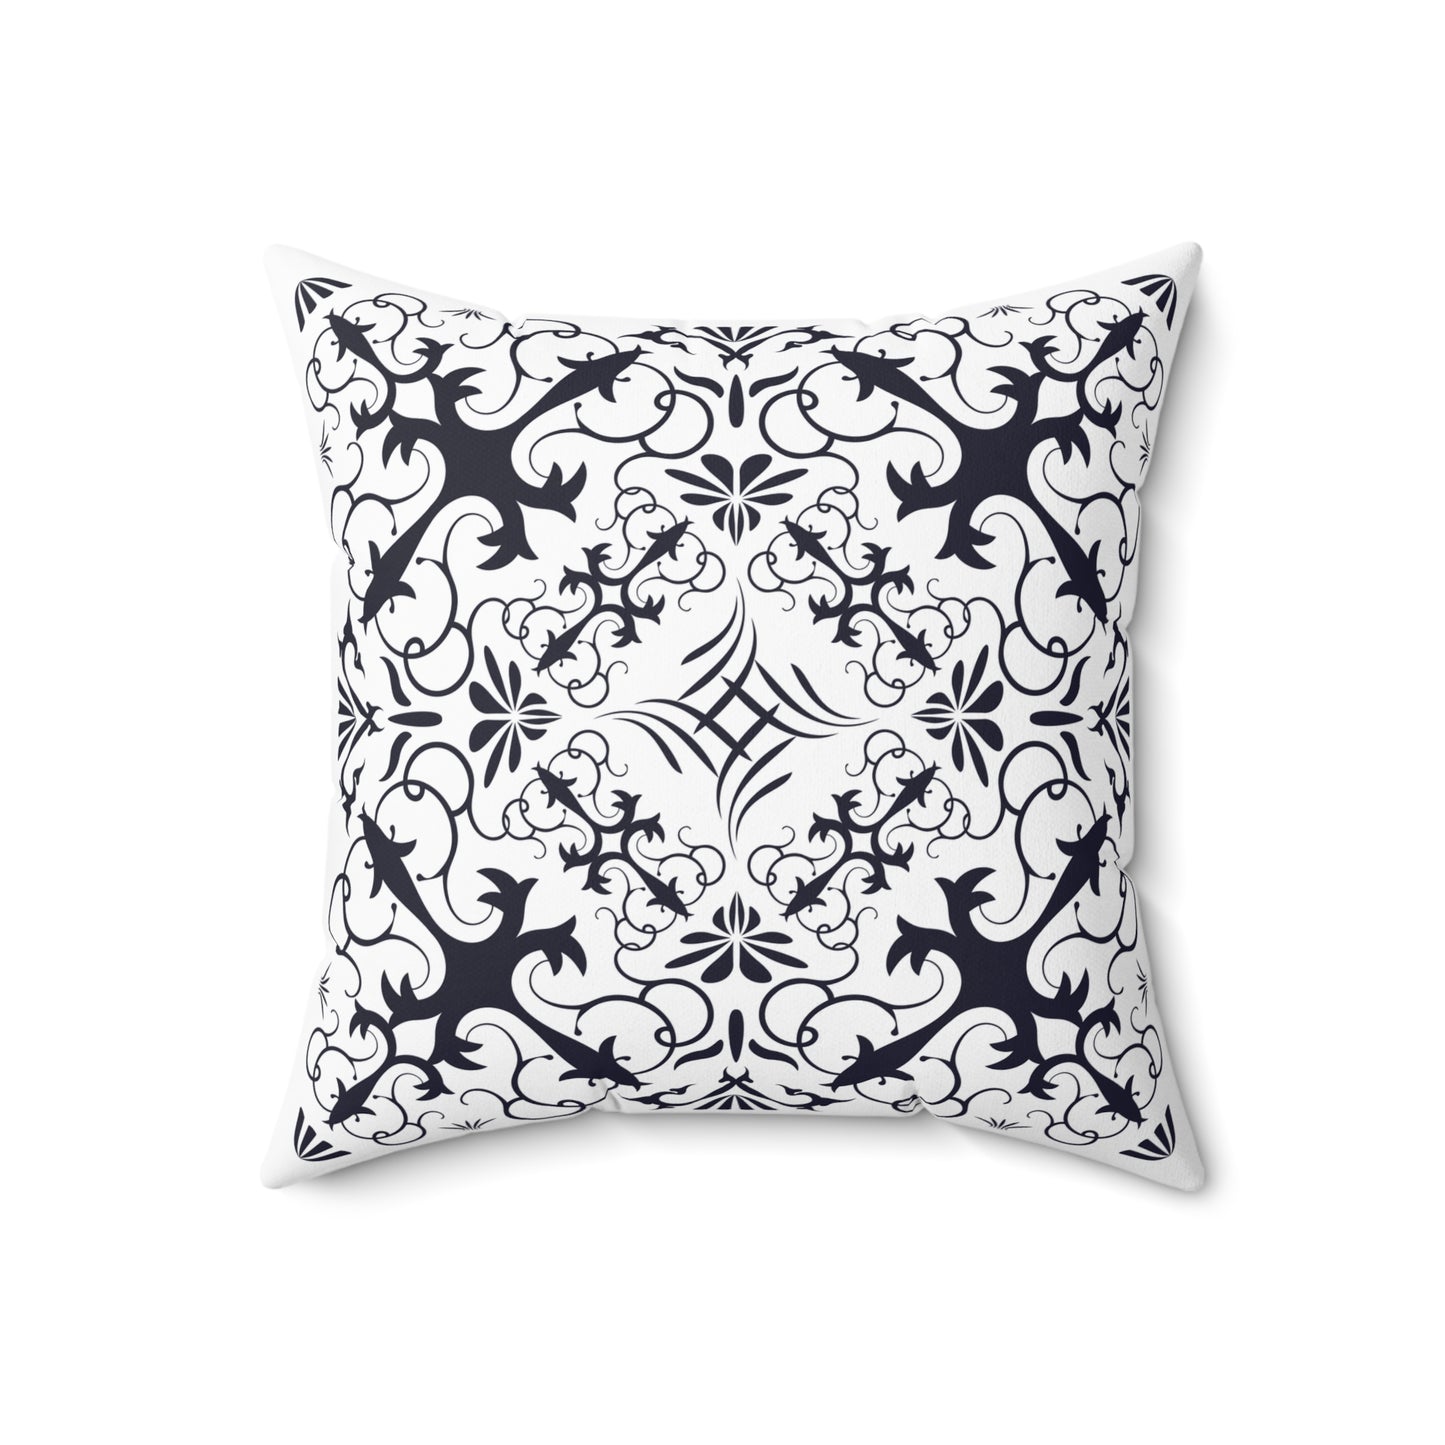 Spun Polyester Square Pillow Kukloso MD Abstract forms No 45 Navy & White - Free Shipping